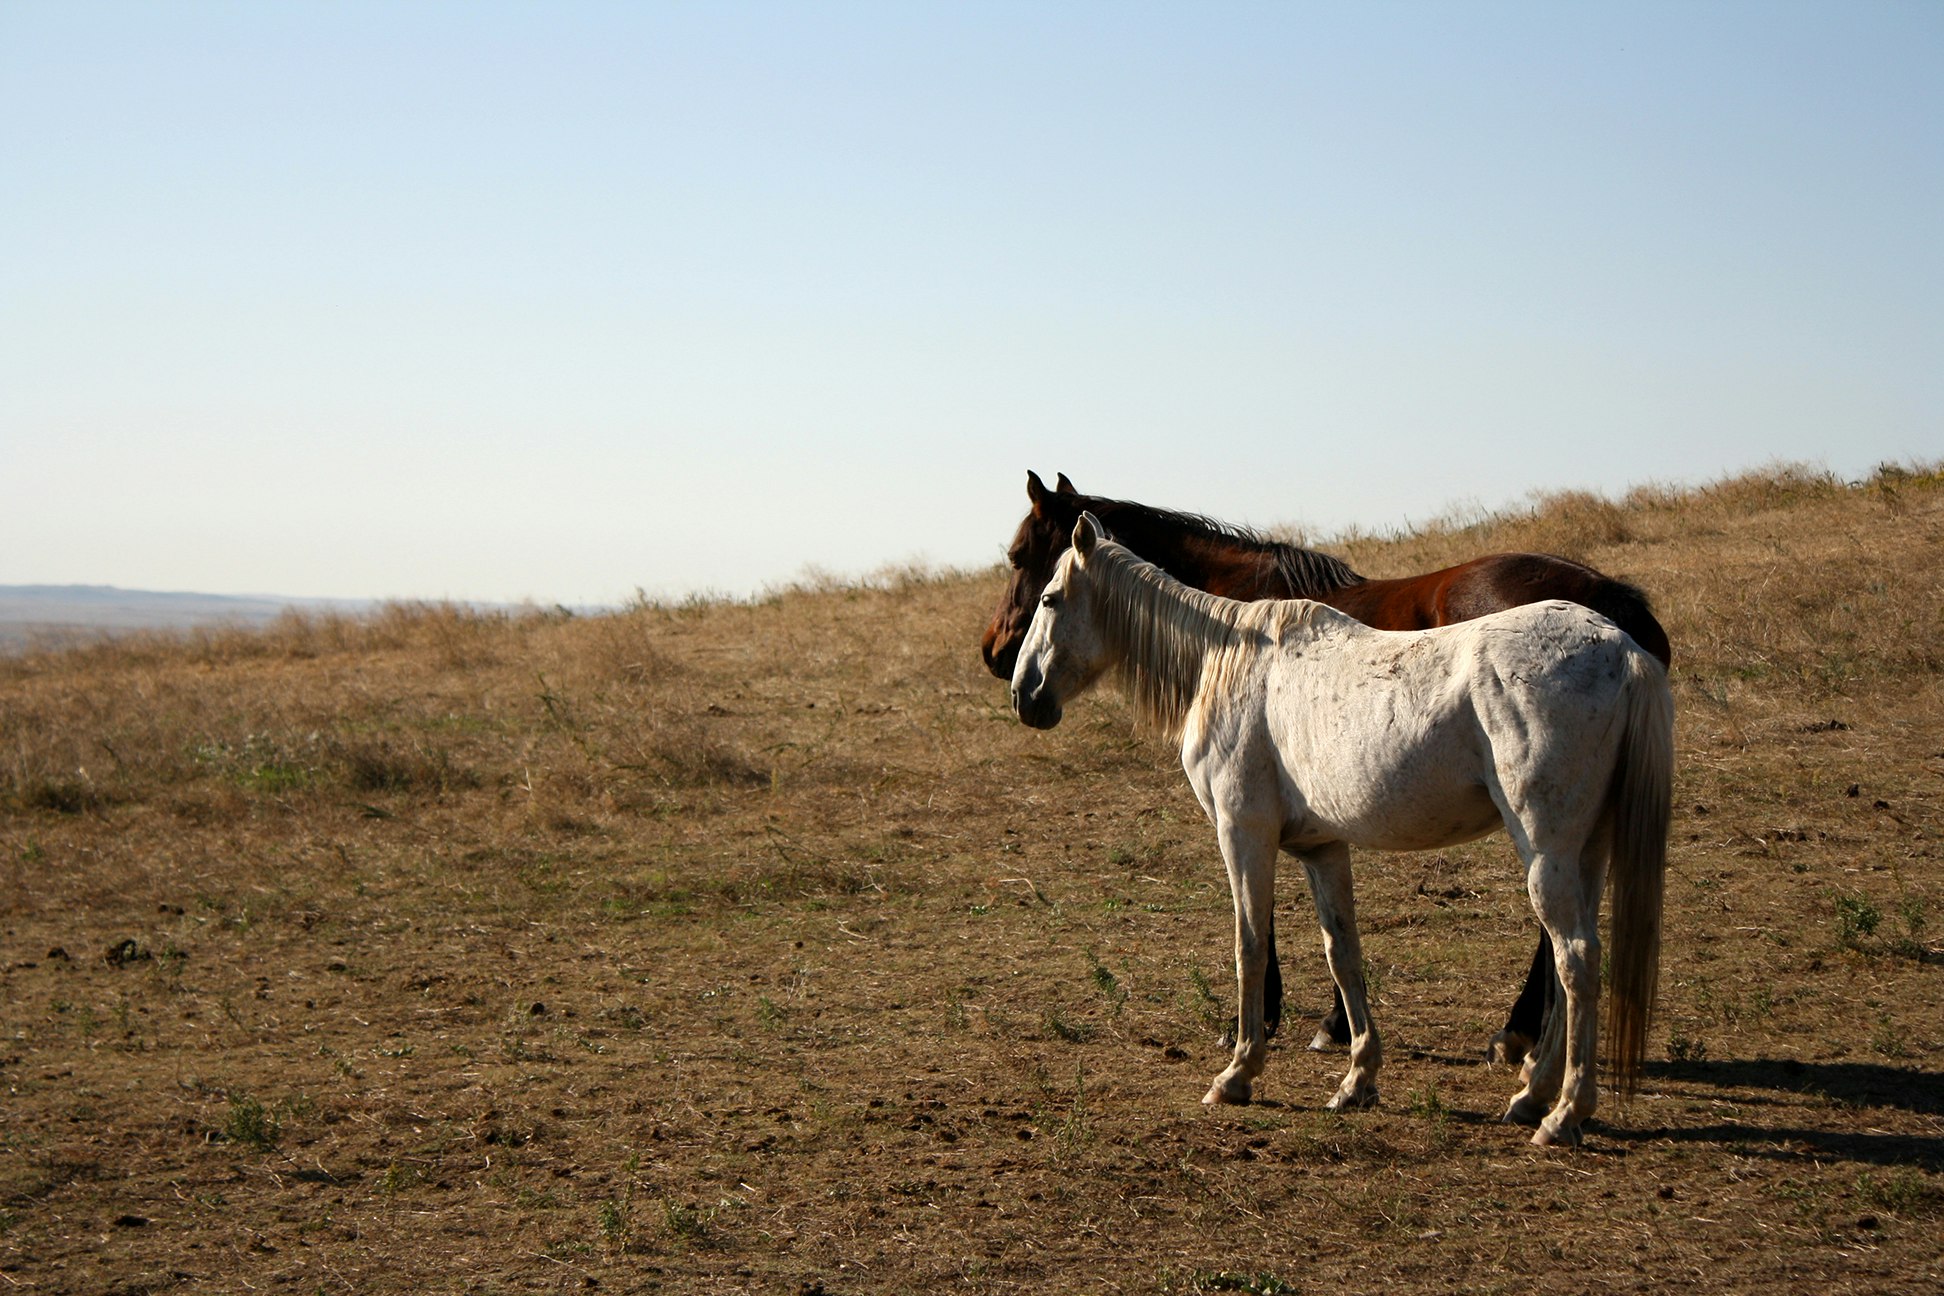 Horses at the Wild Horse Sanctuary. Image by Alexander Howard / Lonely Planet